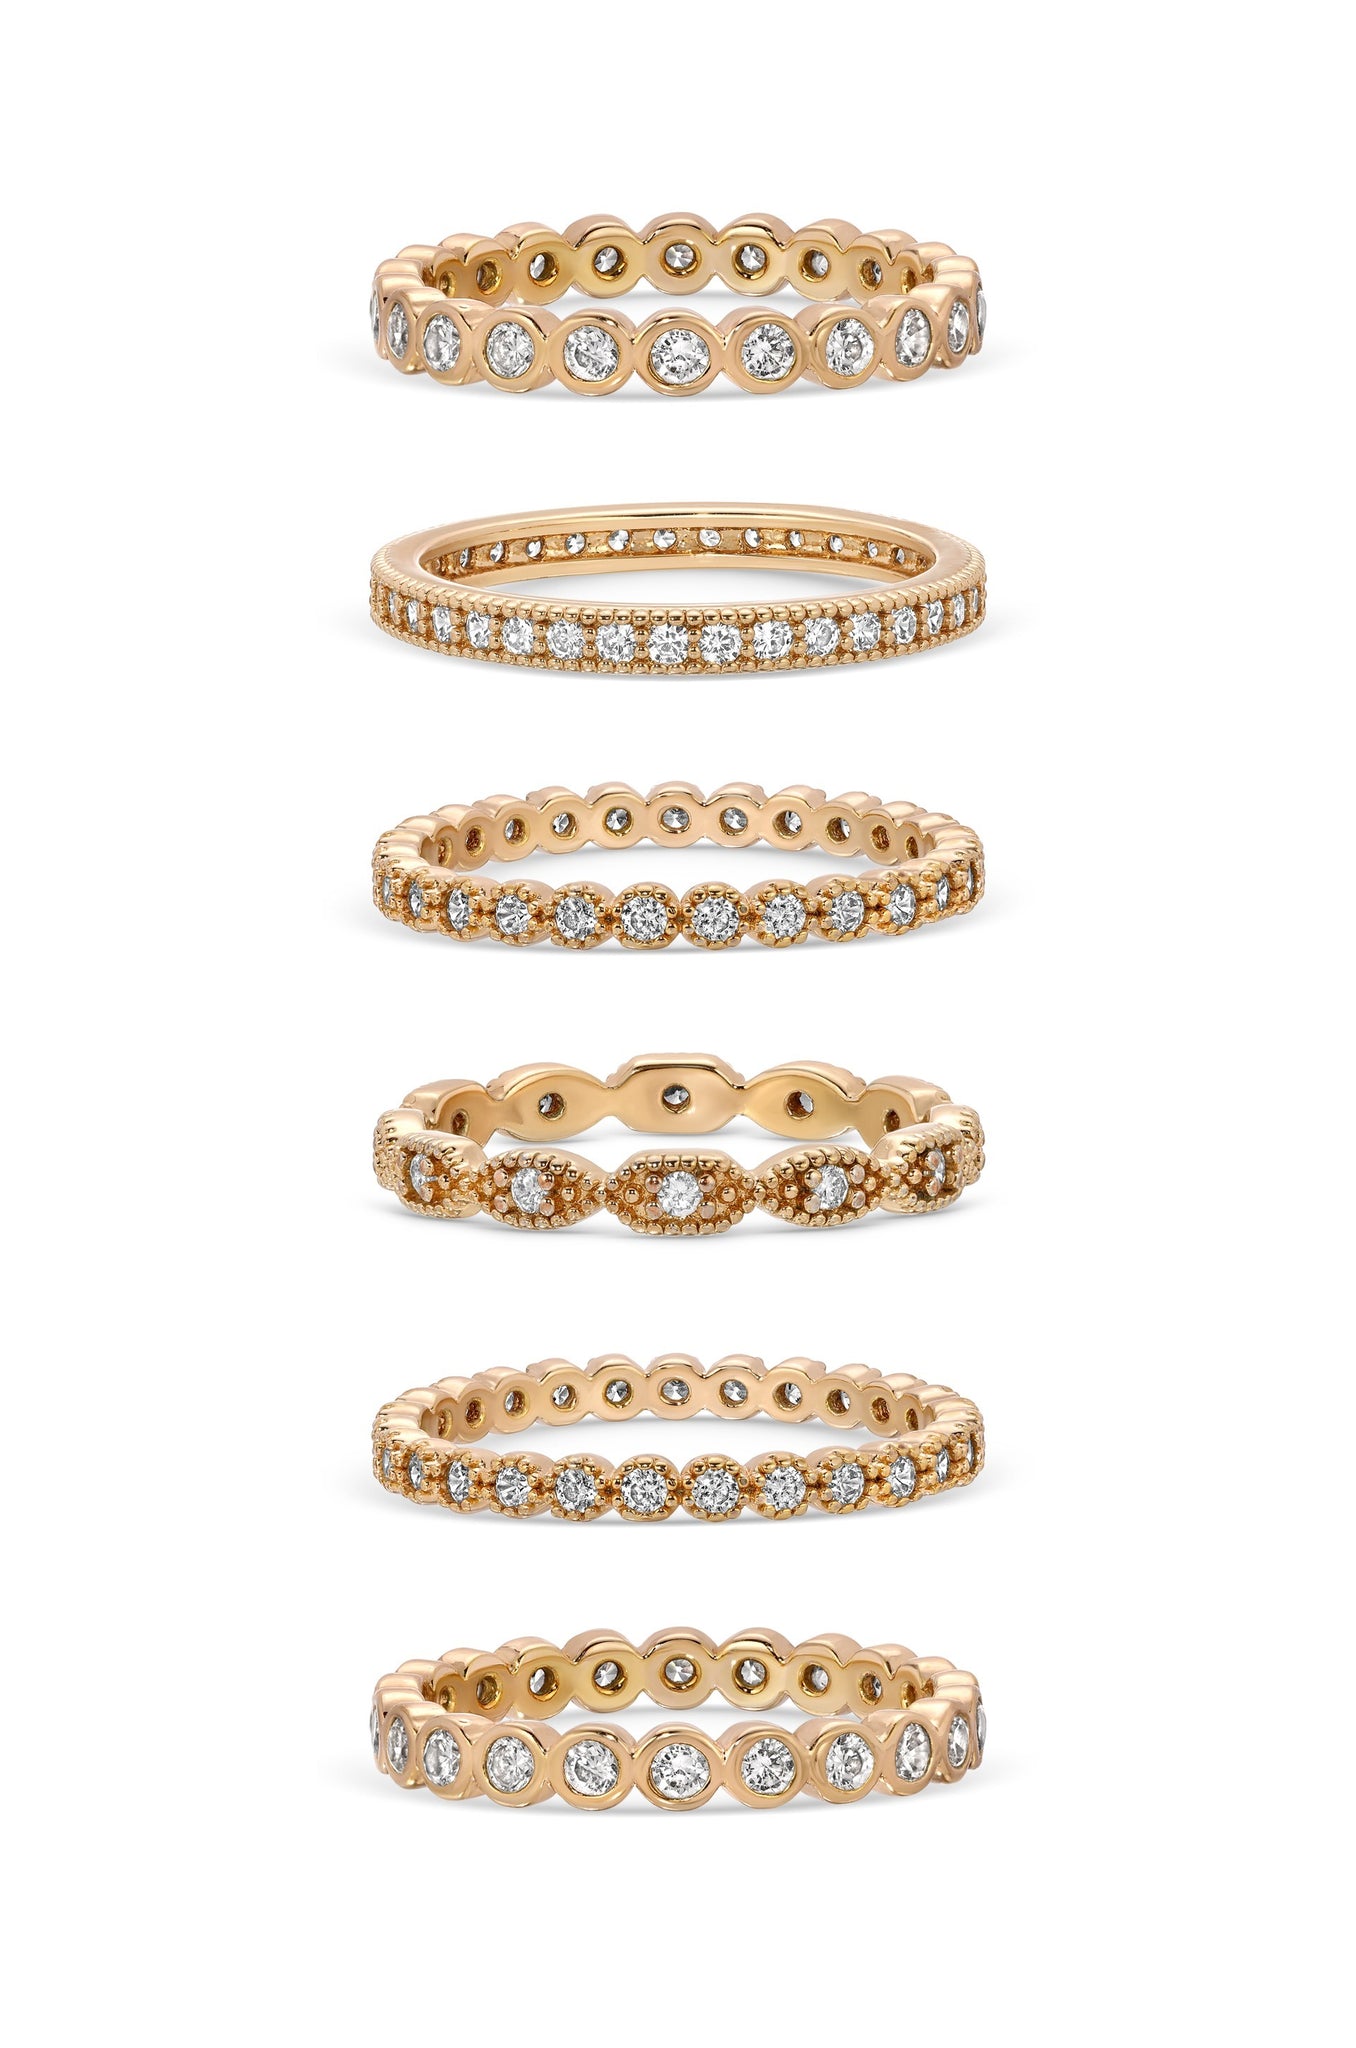 Multi-Stack Geo Crystal 18k Gold Plated Ring Set of 6